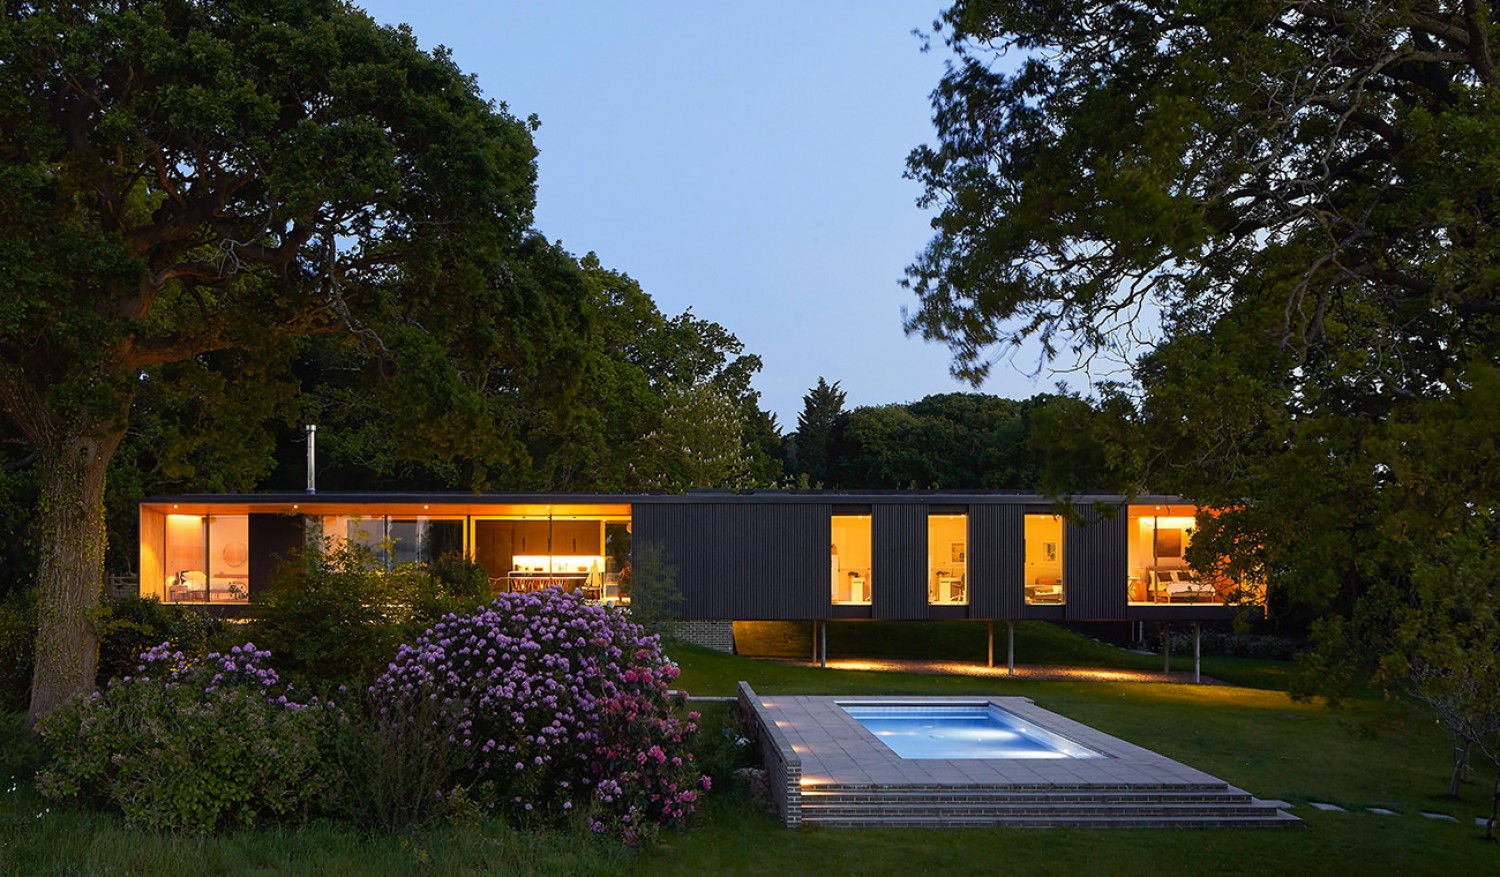 Strom Architects Private House Isle of Wight Hufton+Crow 050 v2